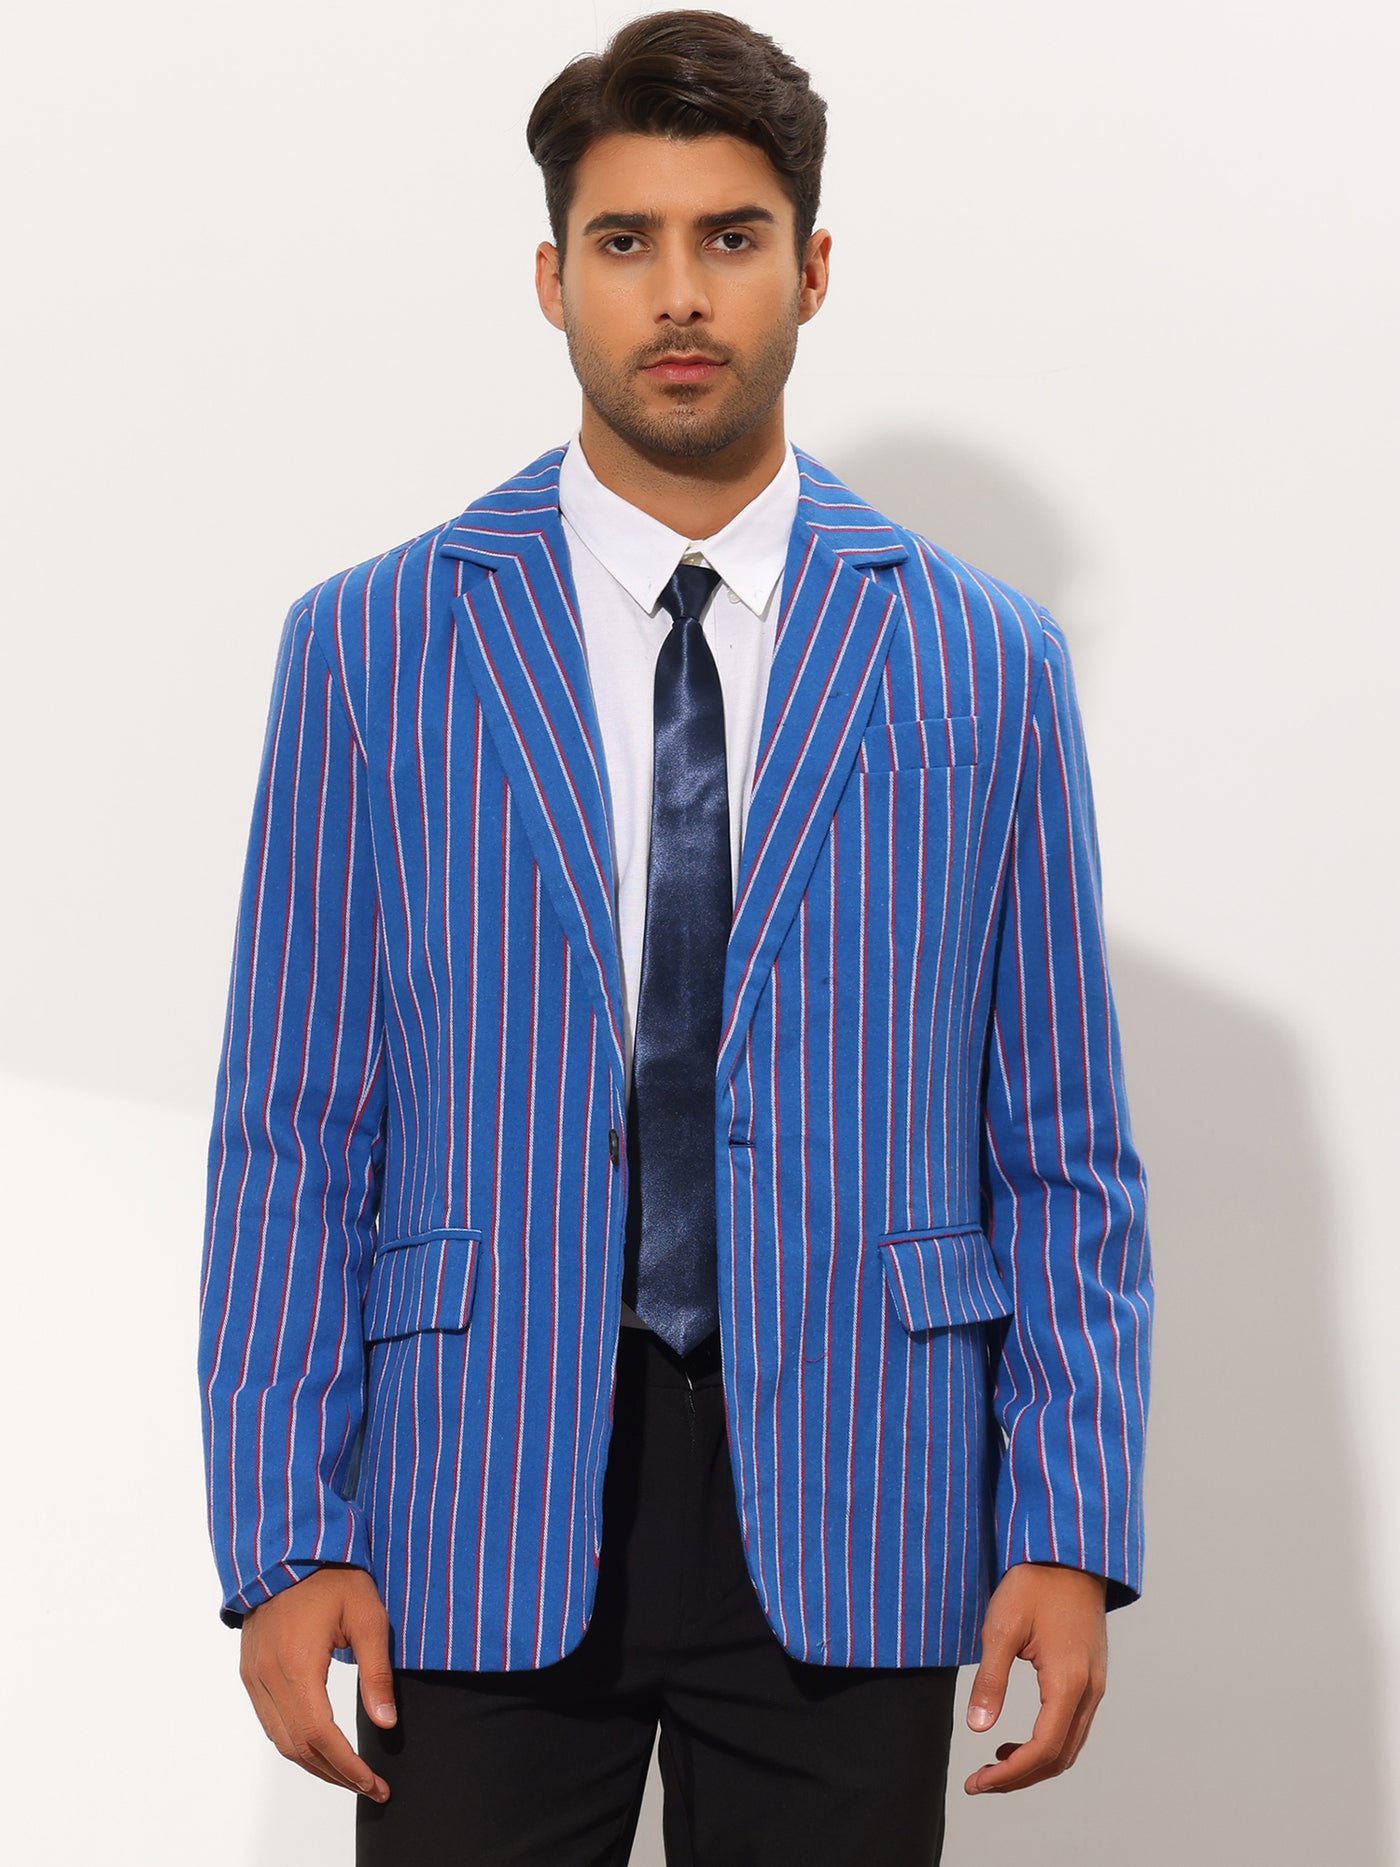 Bublédon Men's Contrasting Color Striped Notched Lapel Single Breasted Blazer